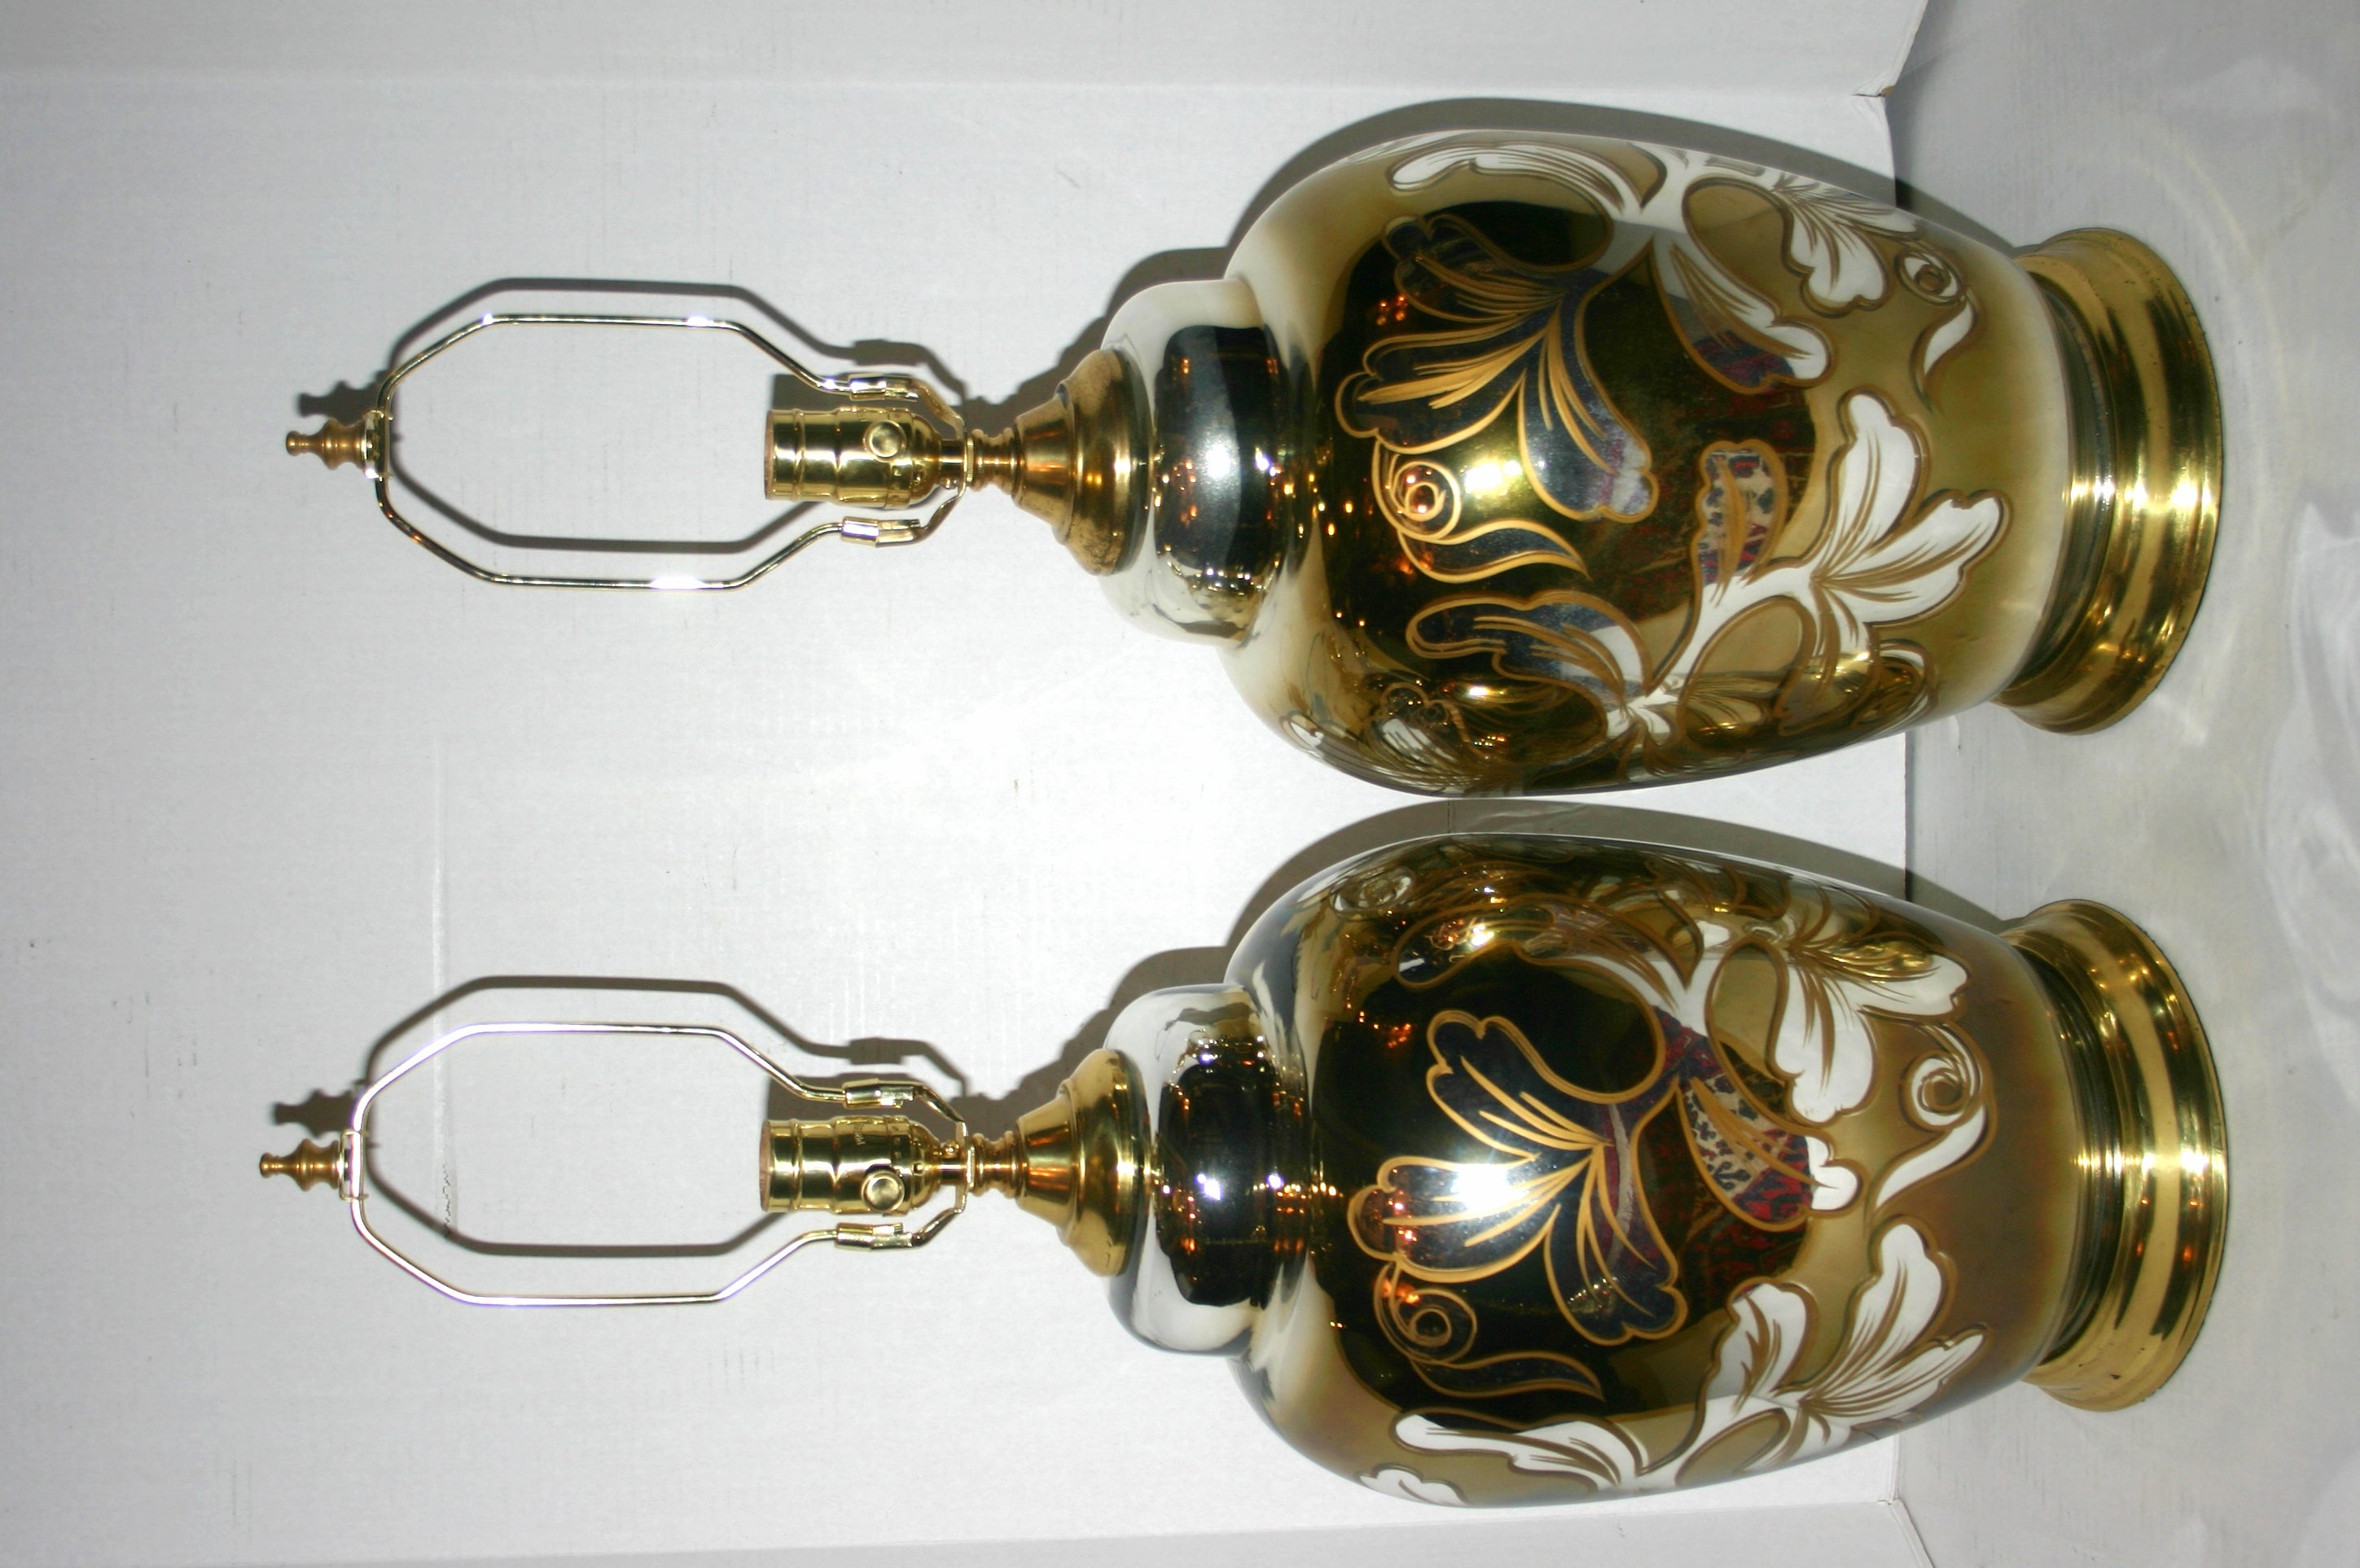 A pair of 1940s French mercury glass lamps with enameled hand-painted decoration.

Measurements
Height of body 17